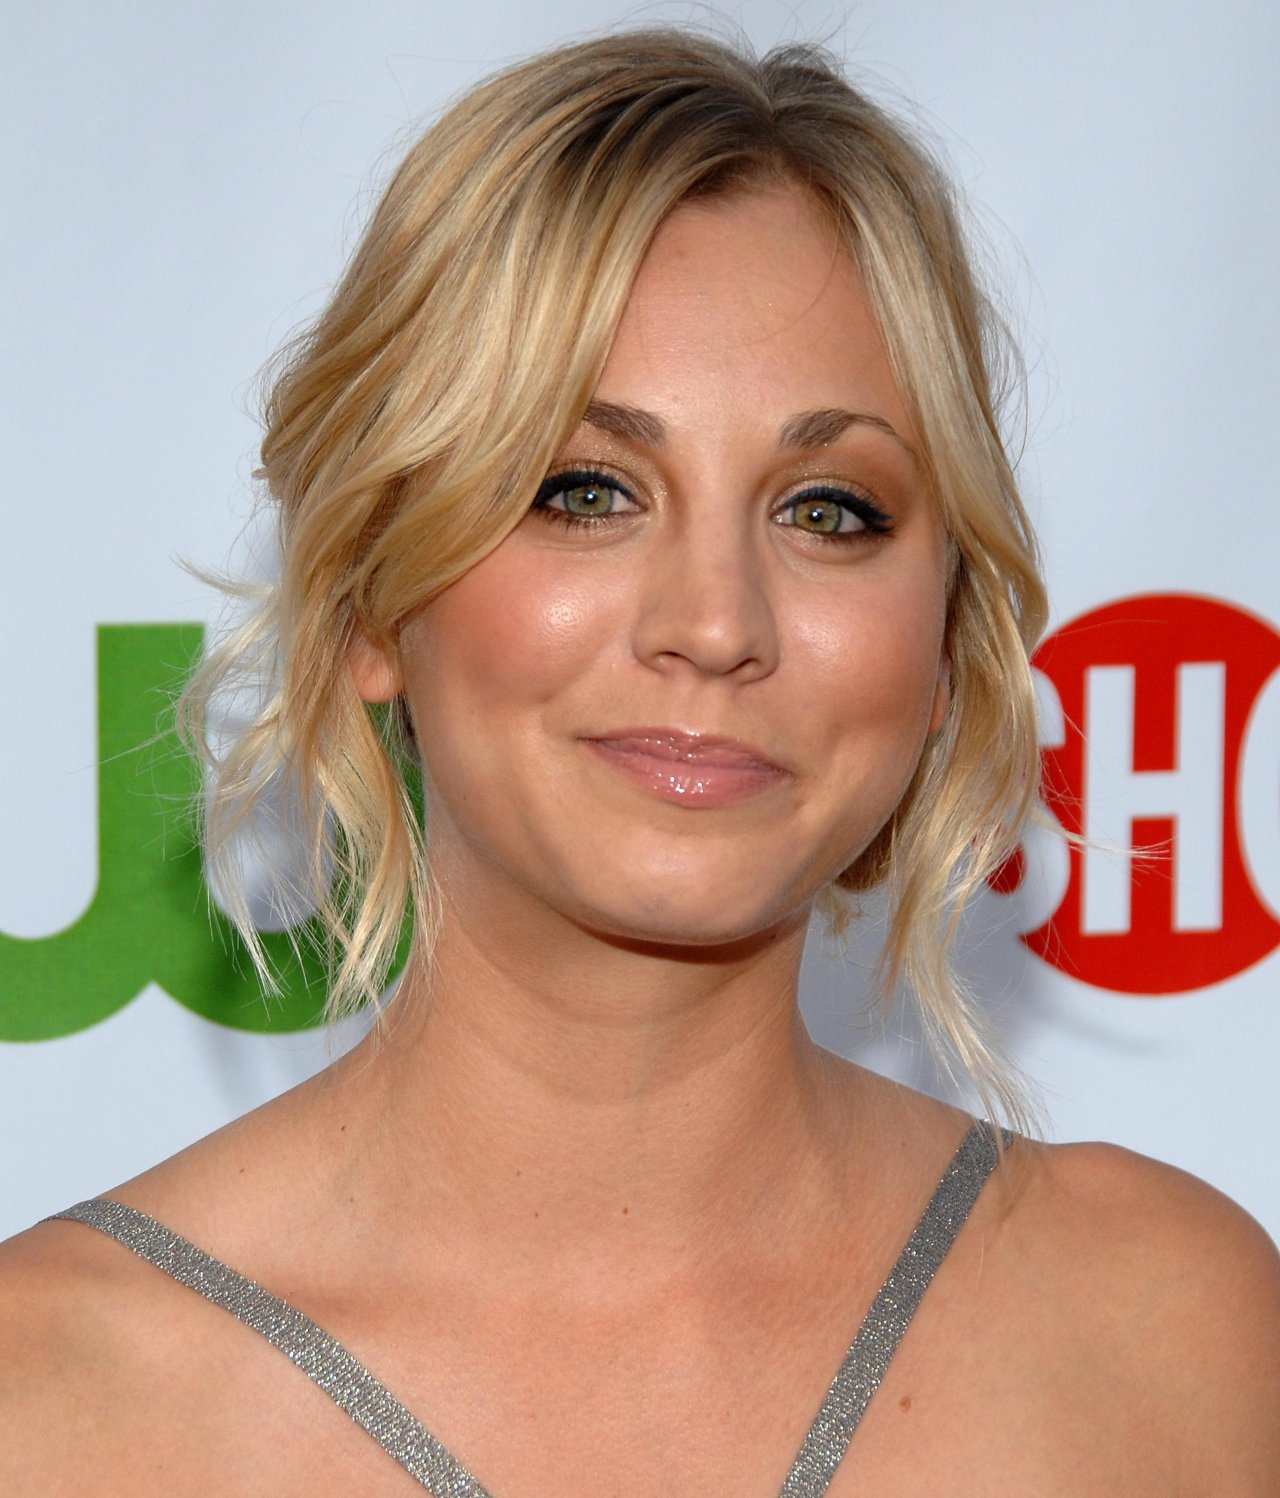 Kaley Cuoco leaked wallpapers